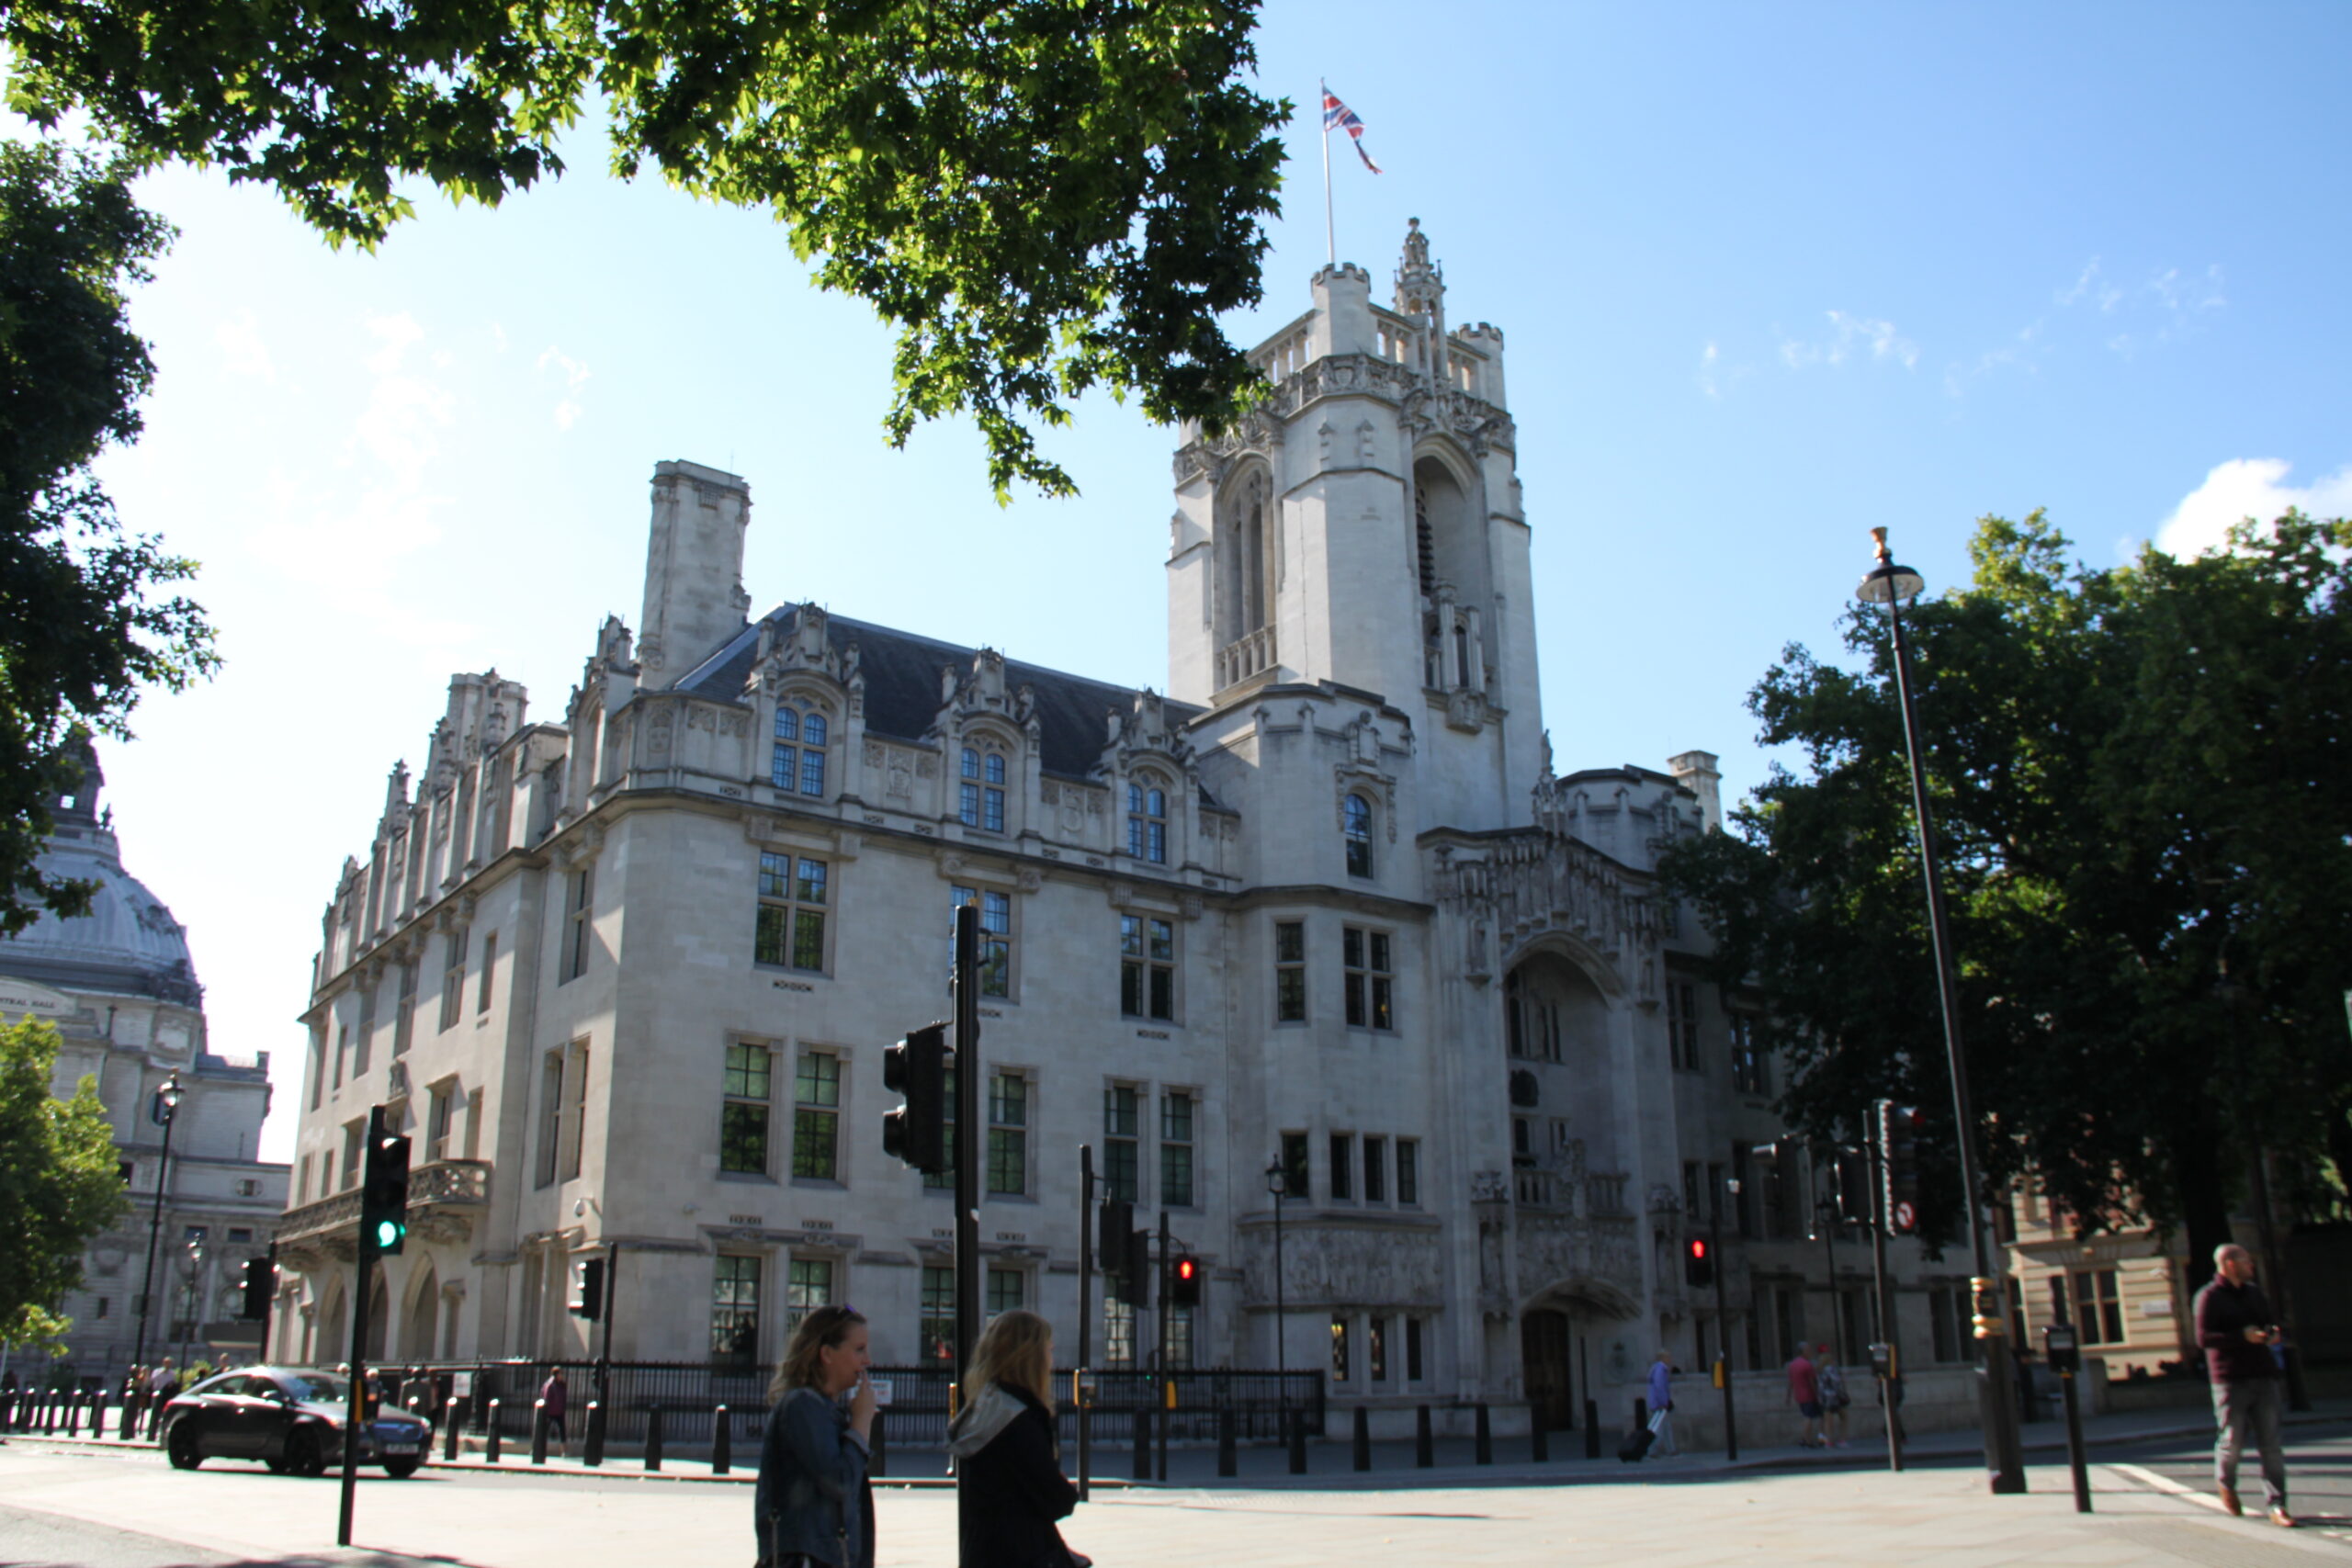 The Middlesex Guildhall in Westminster which houses the Supreme Court of the United Kingdom